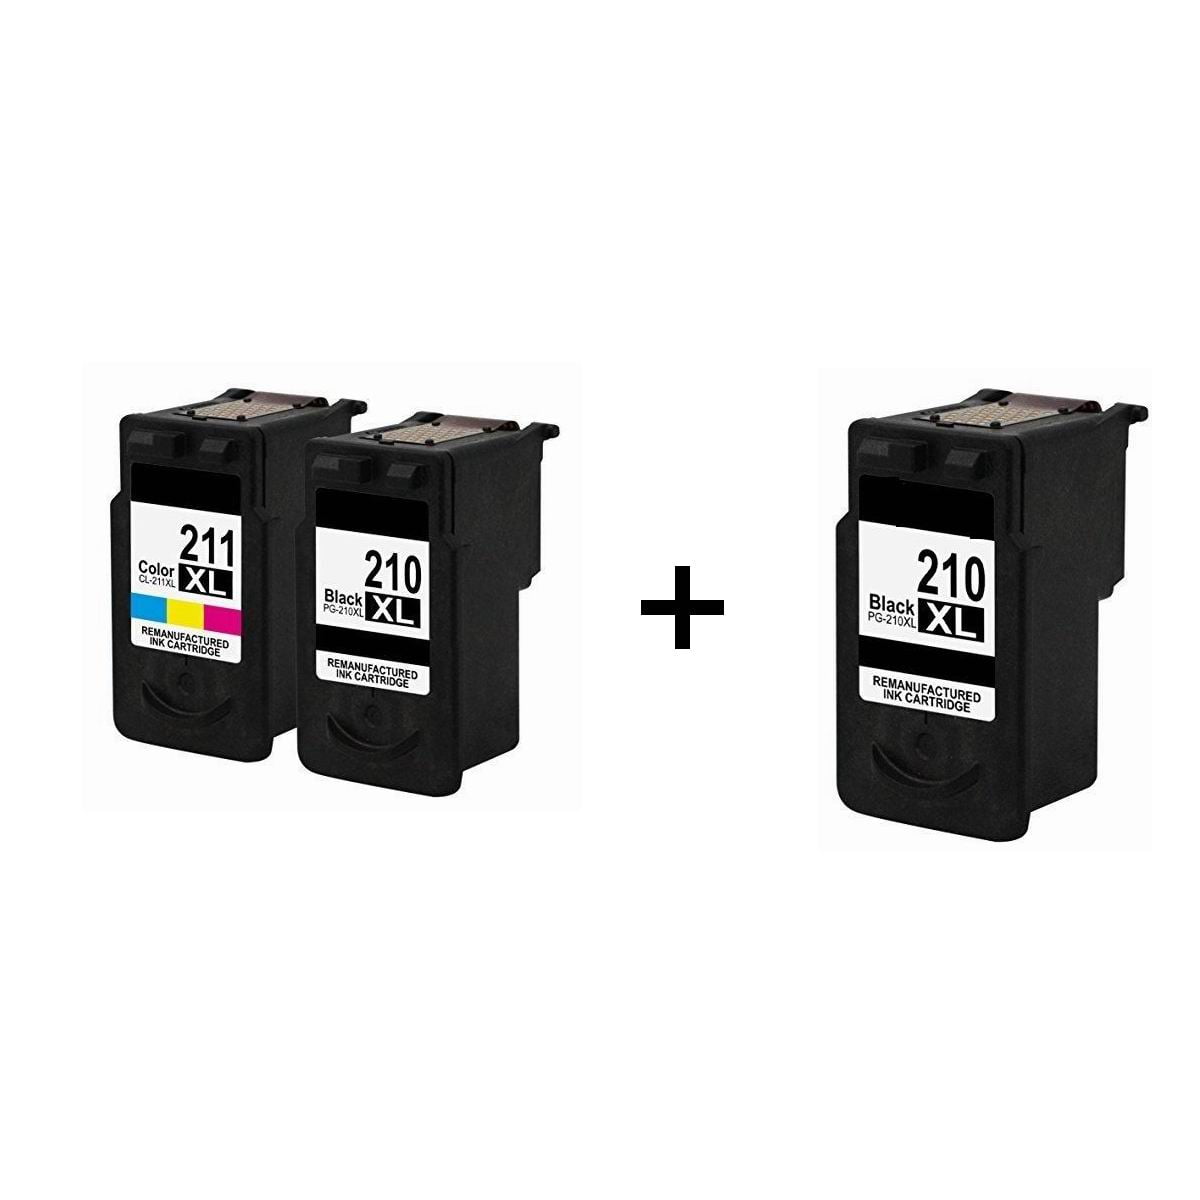 2 Pack Remanufactured Ink Cartridge Replacement for Canon PG 210XL Comptaible with Canon MP495 MP250 MX320 MX410 iP2702 MP280 MX340 MX330 MP240 iP2700 MX420 MP270 MX360 MP490 MP480 MX350 ect 2 Black 